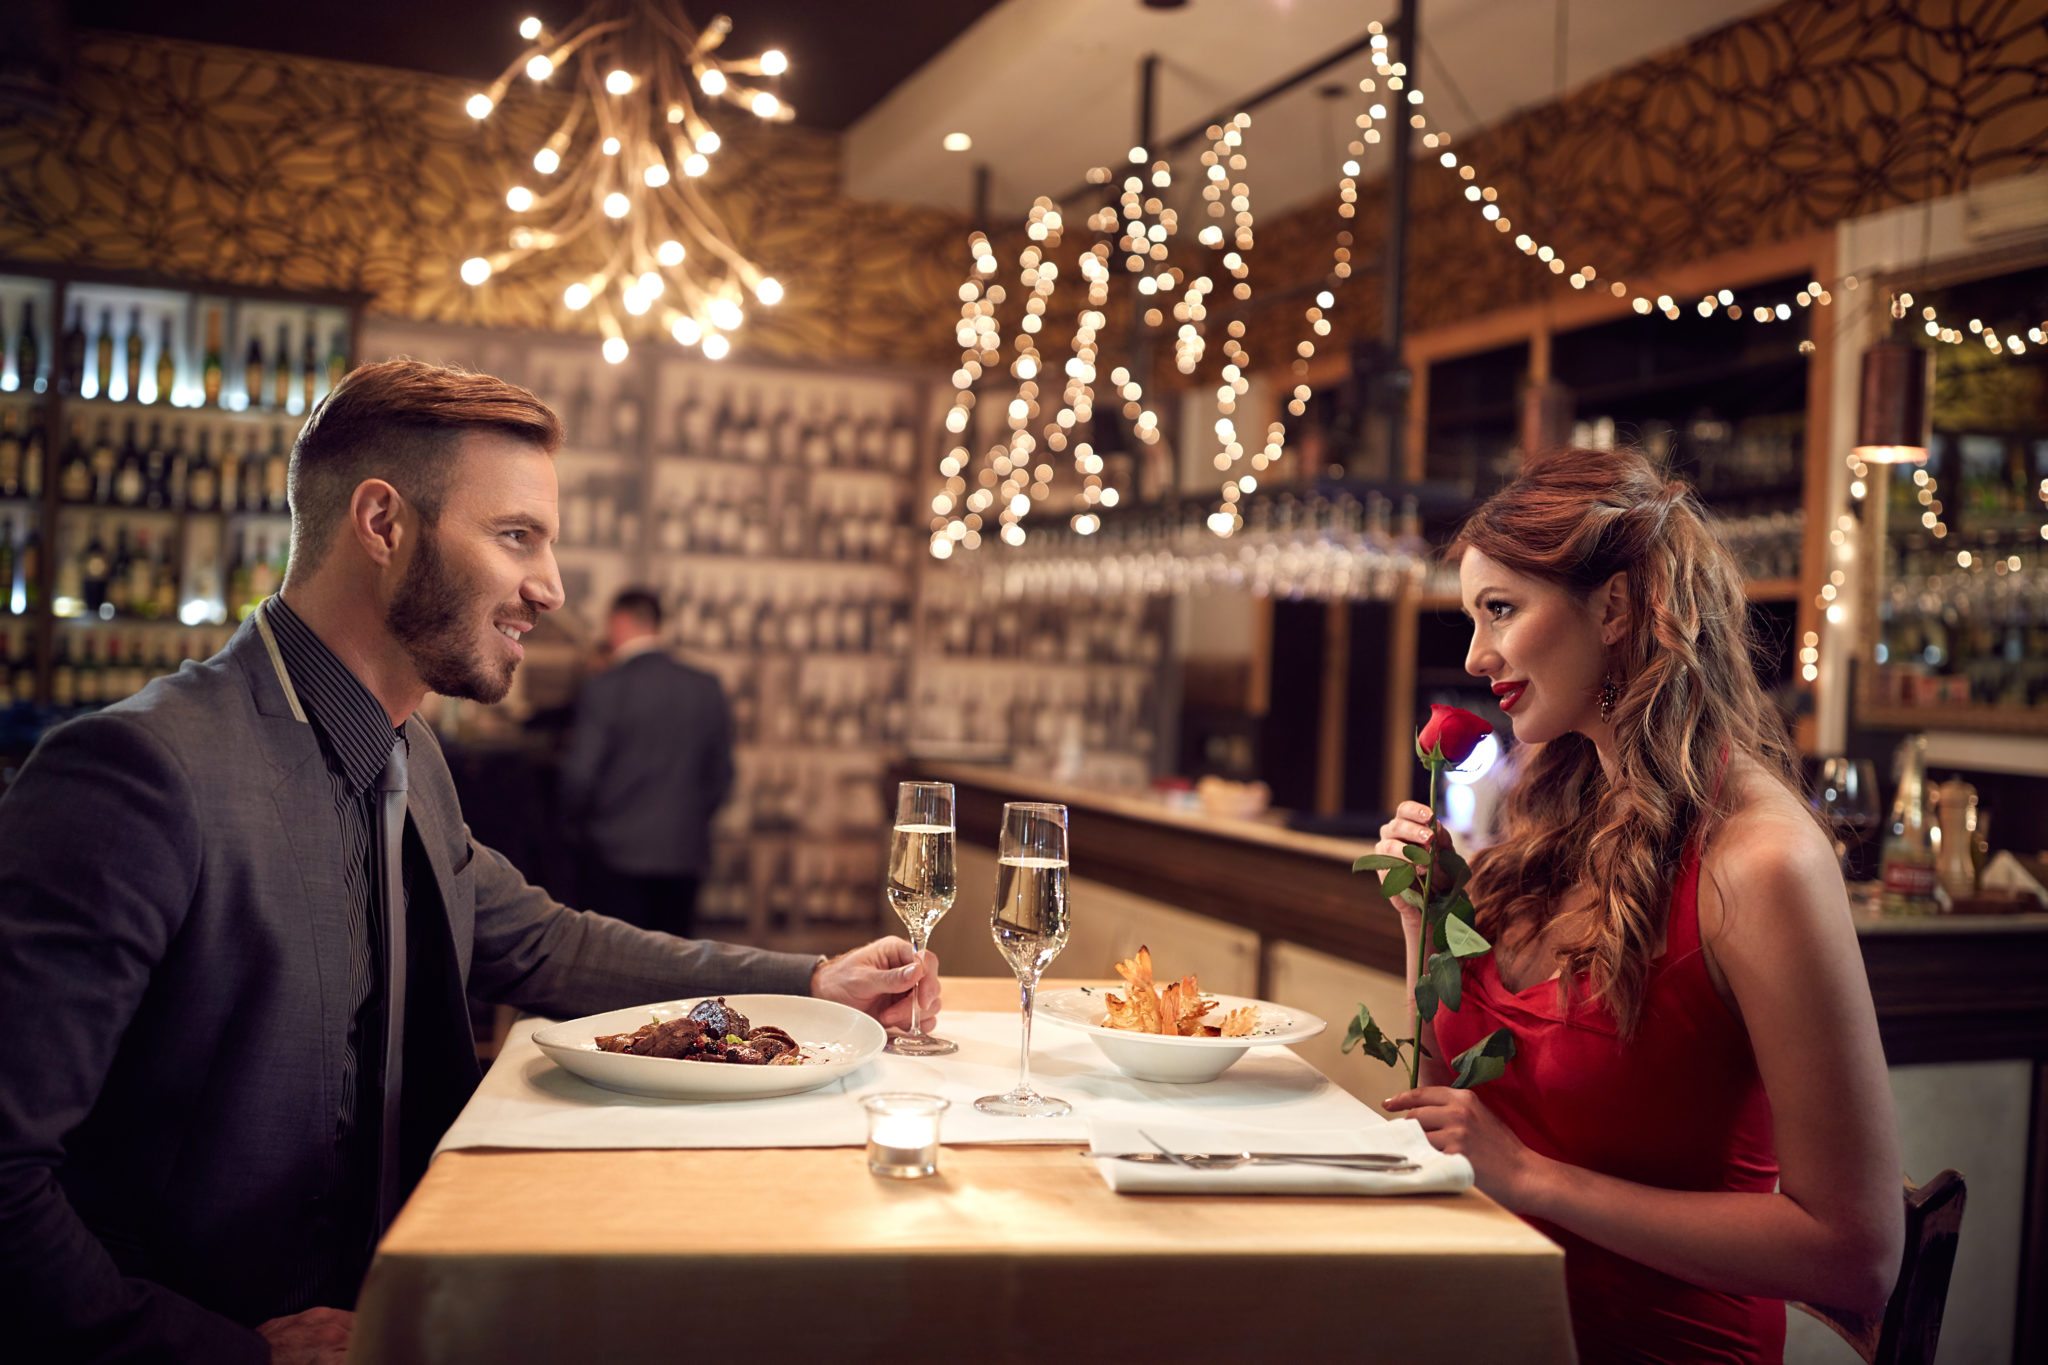 Top 20 Valentines Day Dinner Restaurants Home, Family, Style and Art